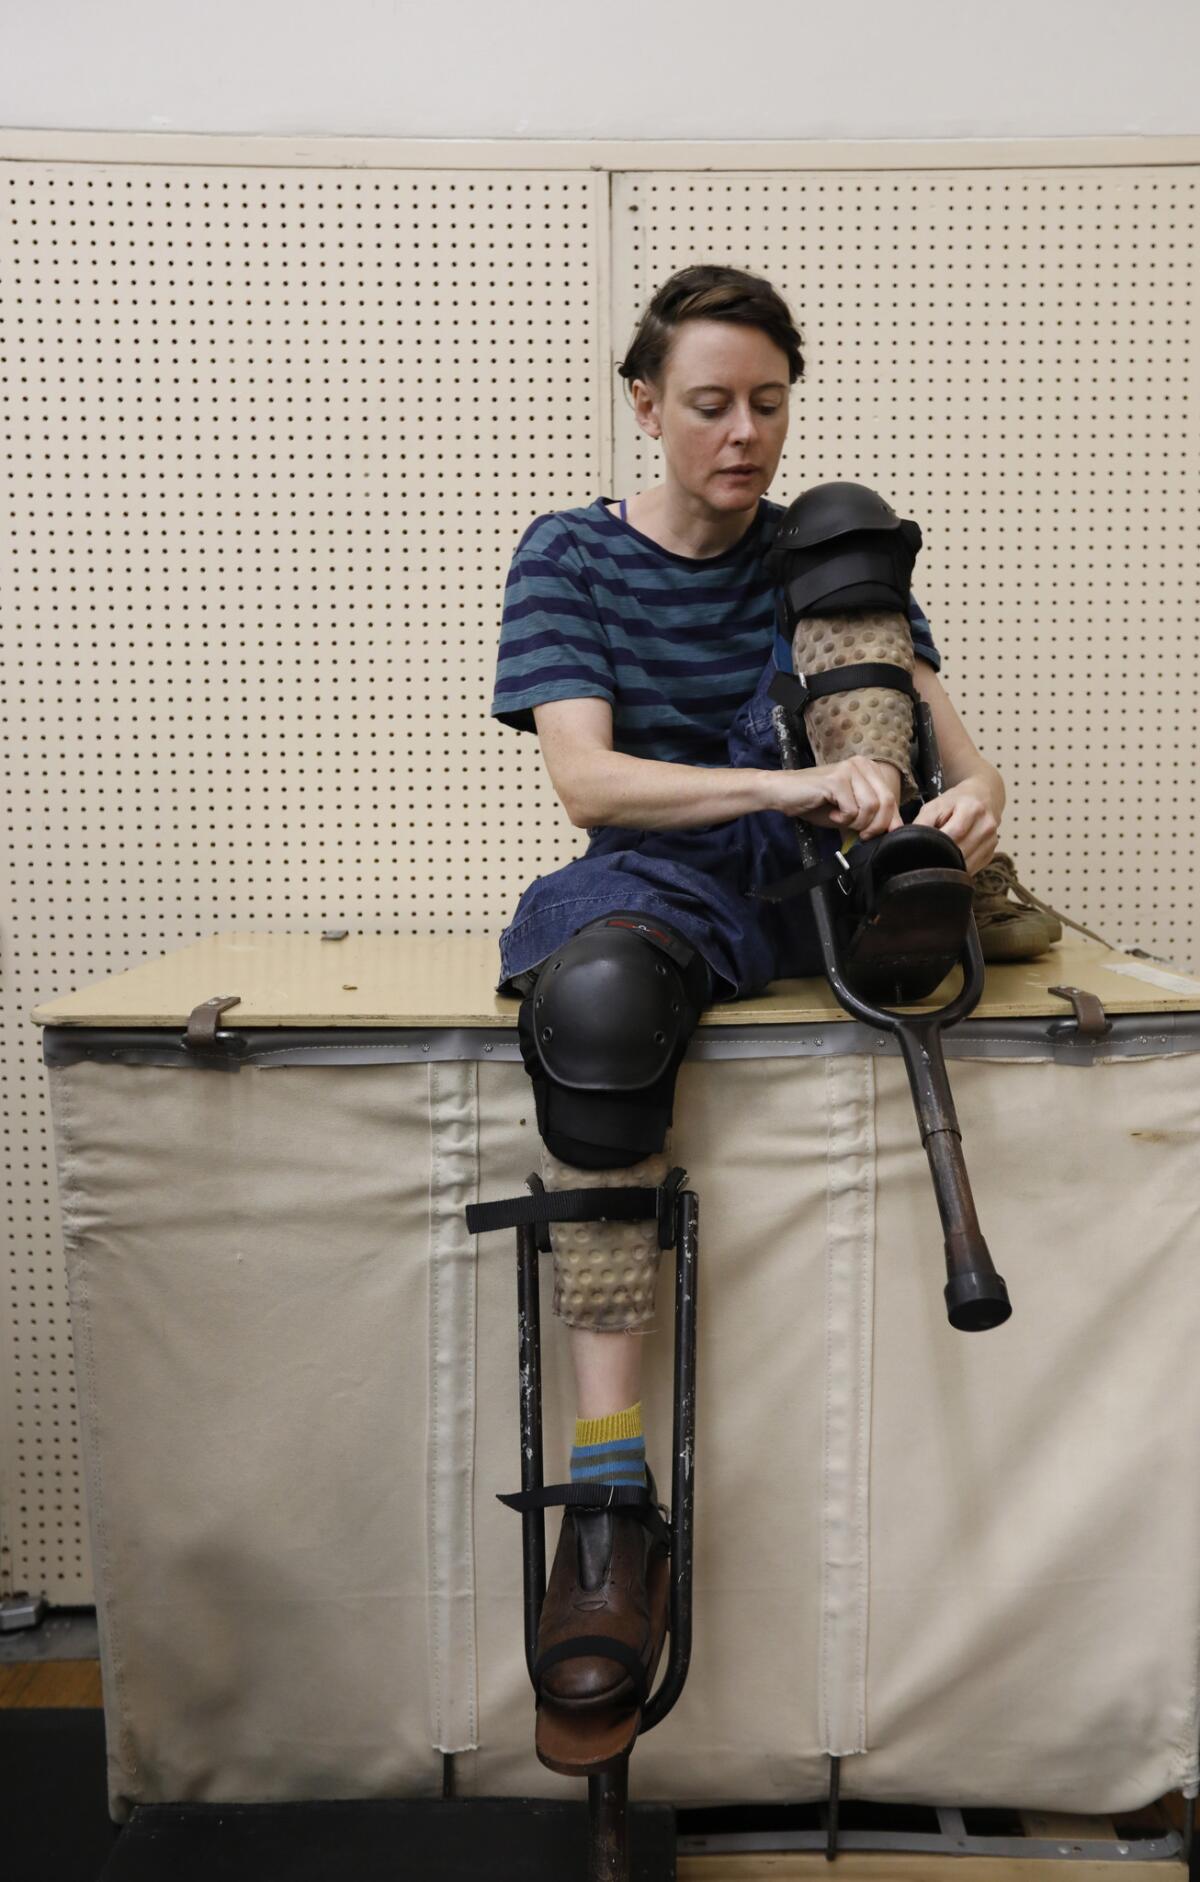 Tina Koch straps on stilts before donning one of the puppets in the opera "Satyagraha," during a rehearsal at the Dorothy Chandler Pavilion in Los Angeles.